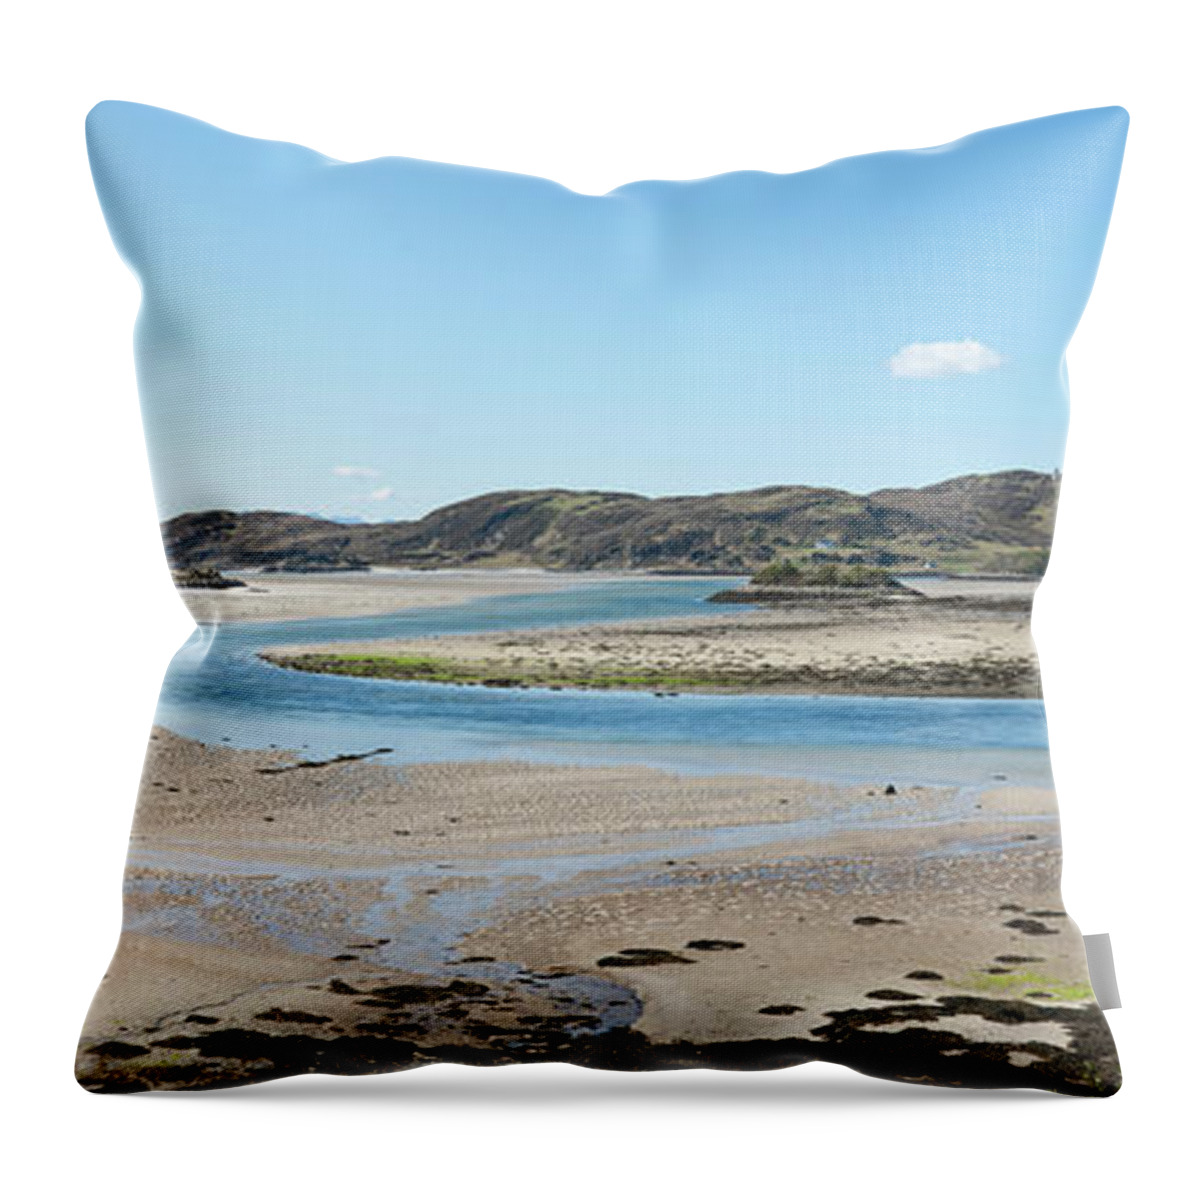 Scenics Throw Pillow featuring the photograph Silver Sands Of Morar Panorama by Abzee